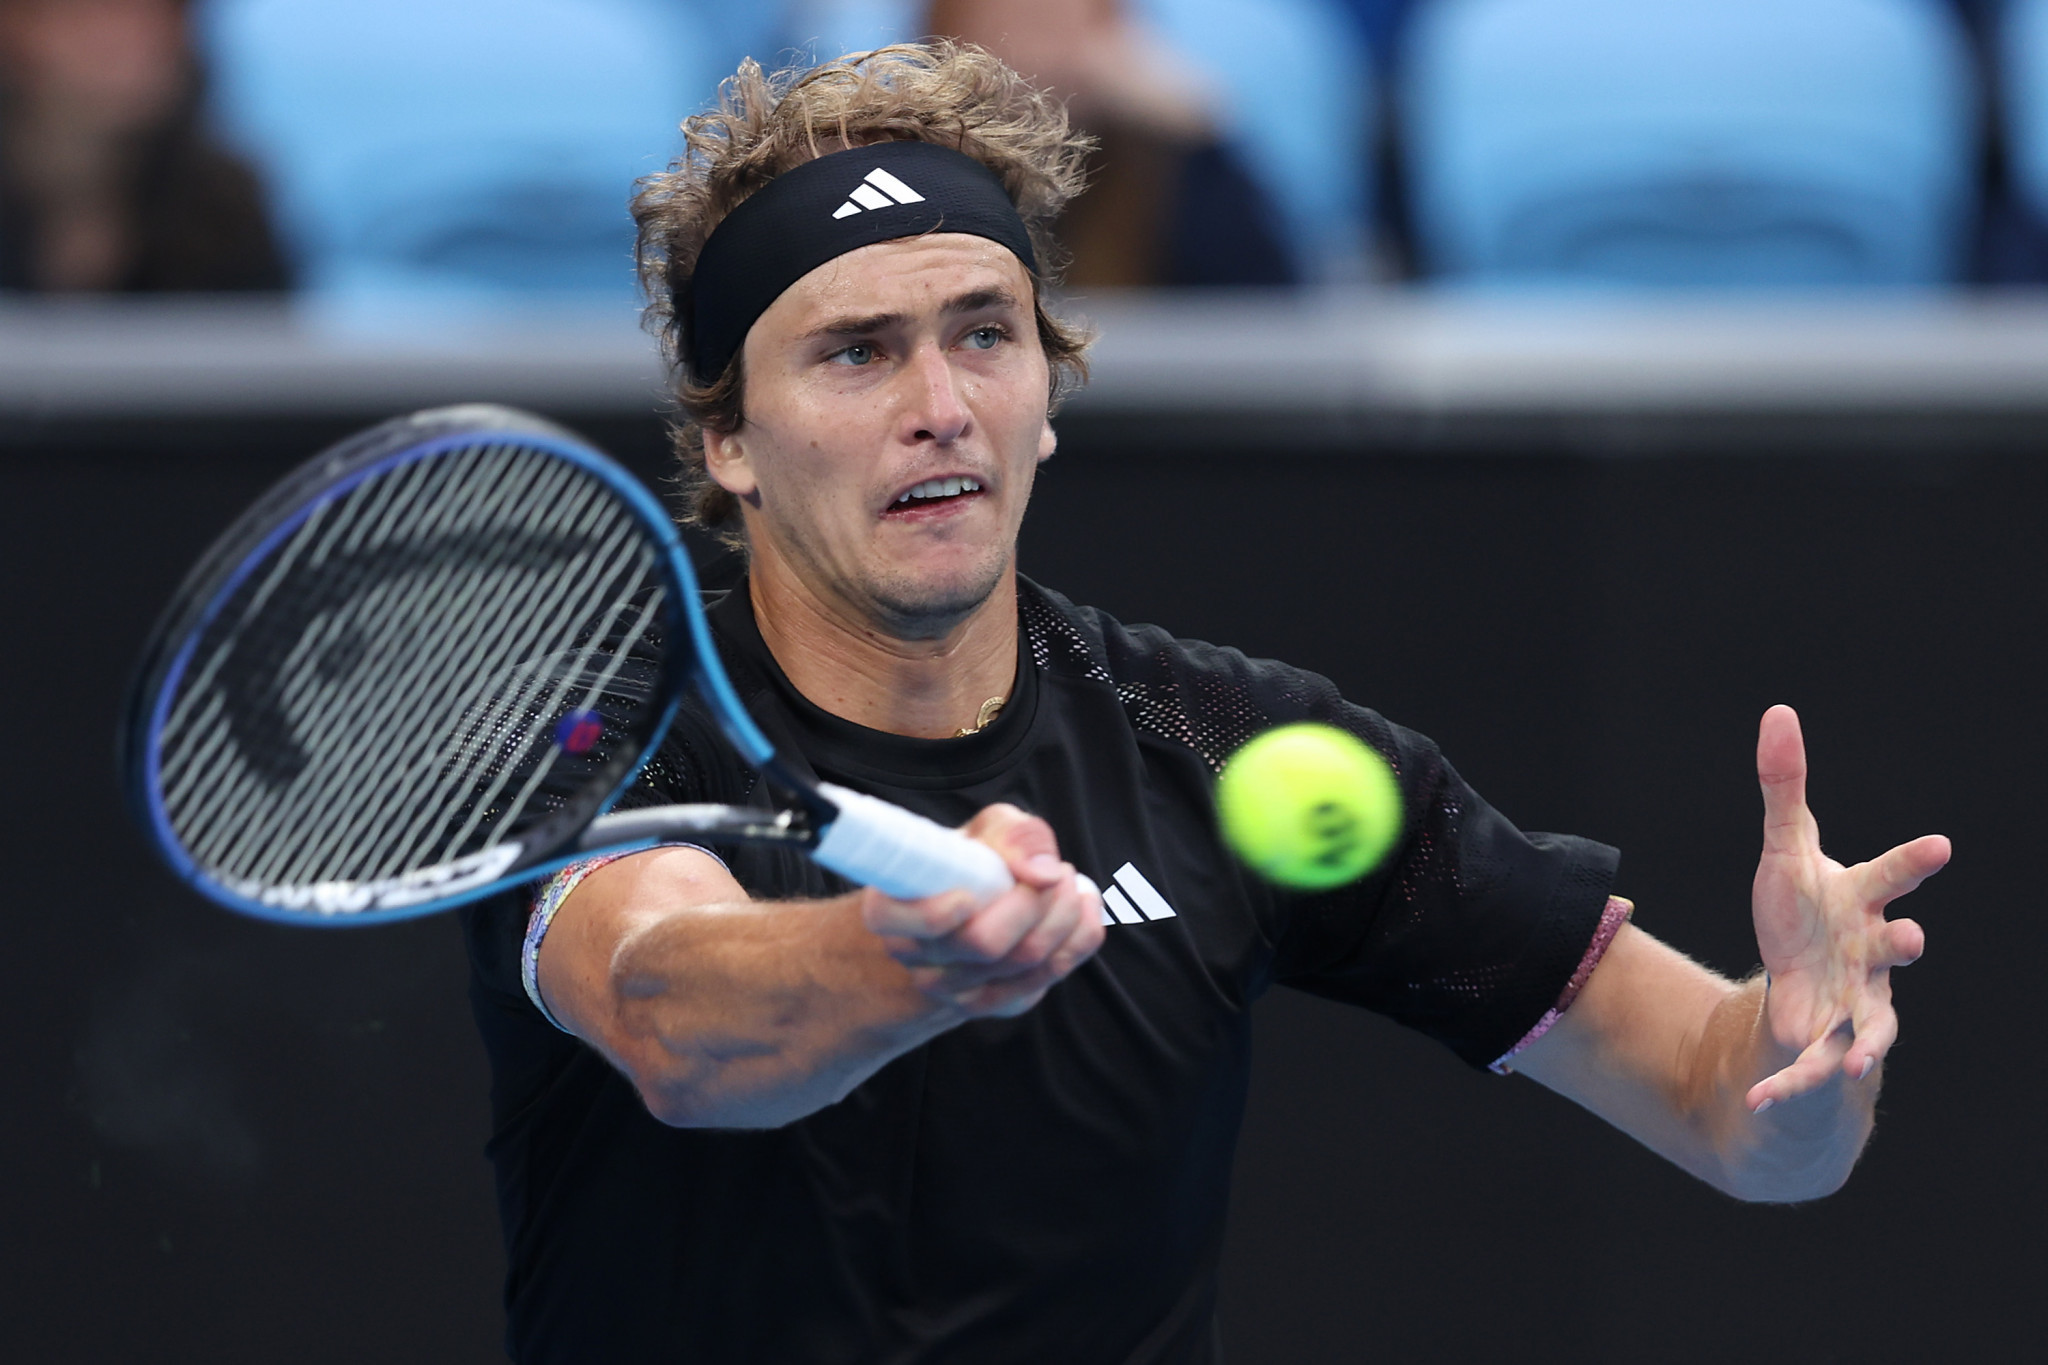 The Association of Tennis Professionals say it will take no disciplinary action against Alexander Zverev after investigating allegations of domestic abuse against the Olympic men's singles champion ©Getty Images